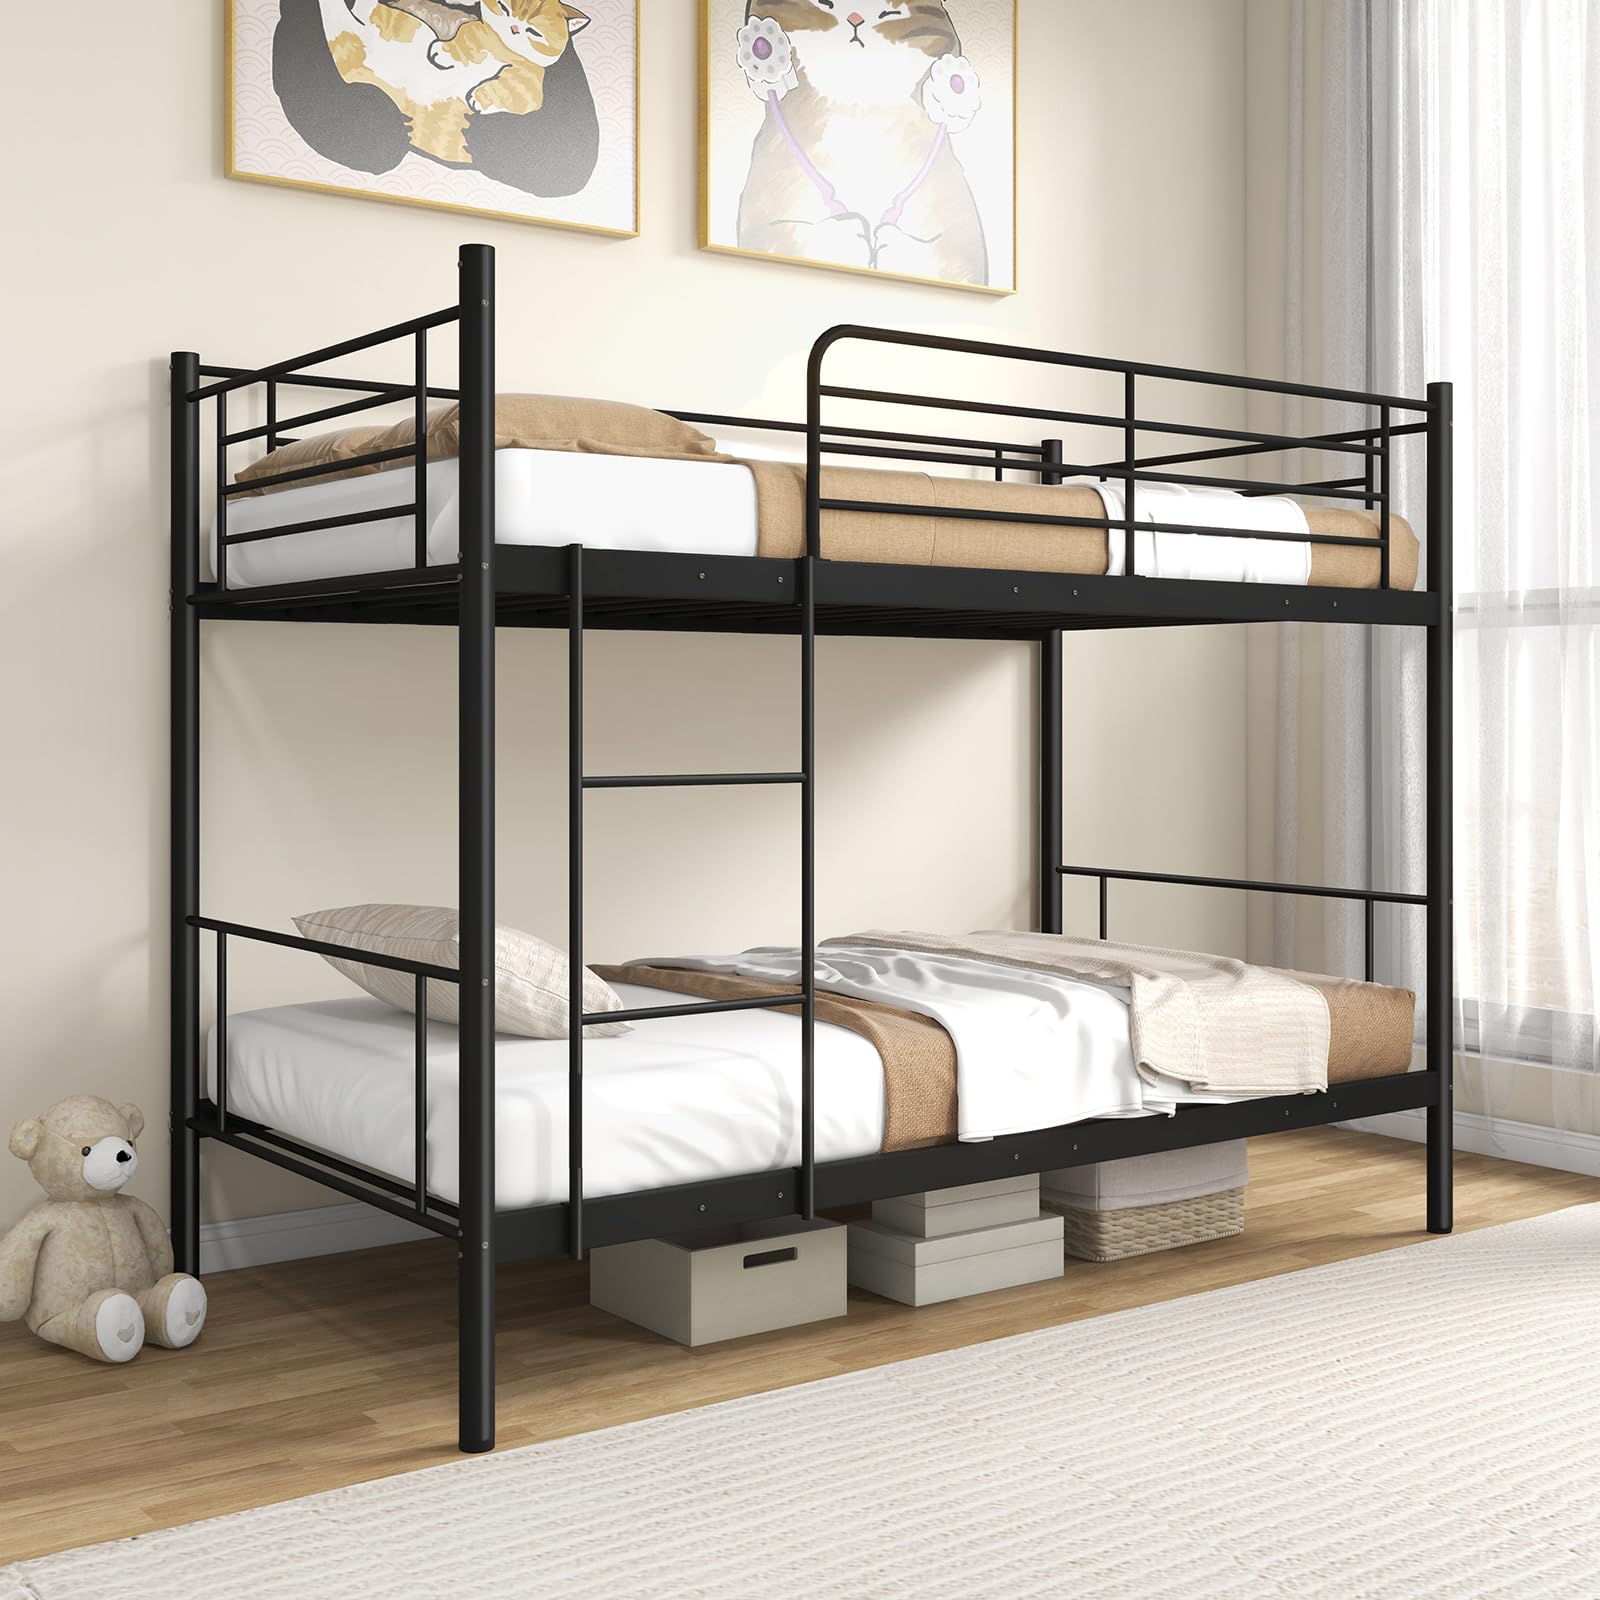 Giantex Bunk Bed Twin Over Twin, Metal Bunk Bed Frame w/Built-in Ladder, Safety Guardrail